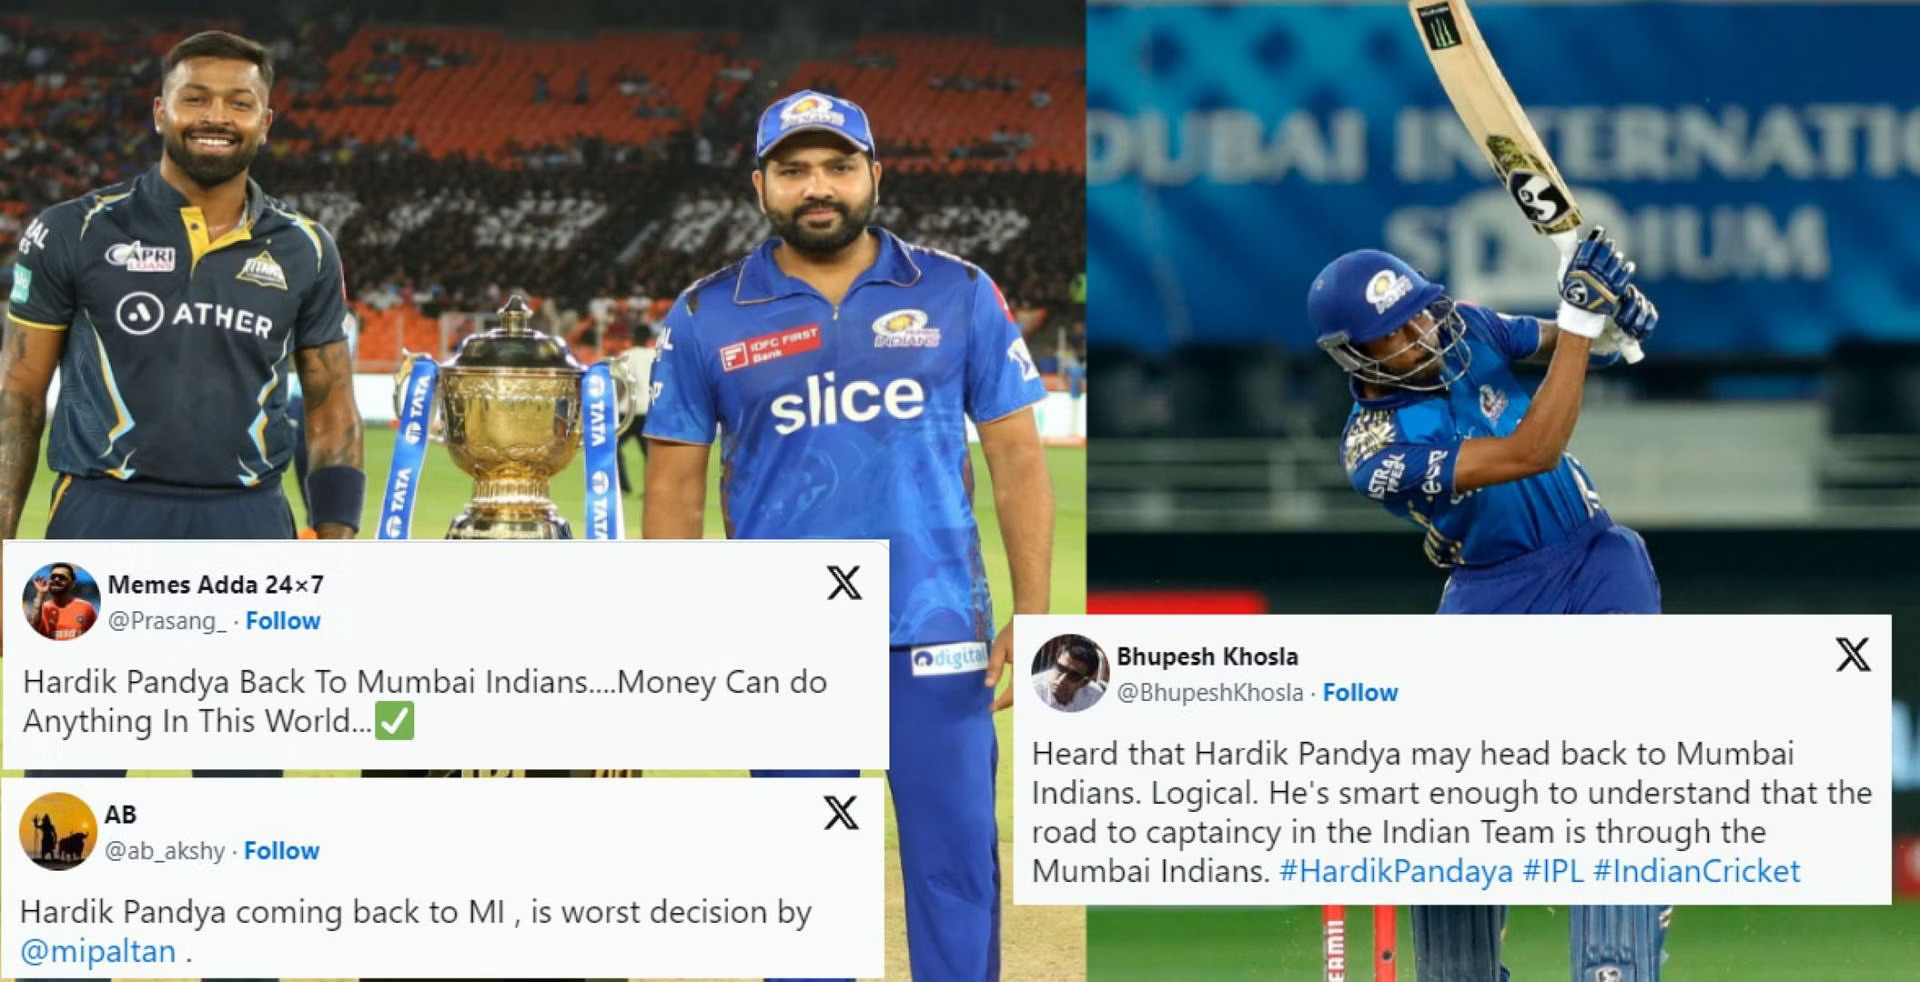 “Money can do anything in this world” – Fans react to Hardik Pandya’s potential return to Mumbai Indians